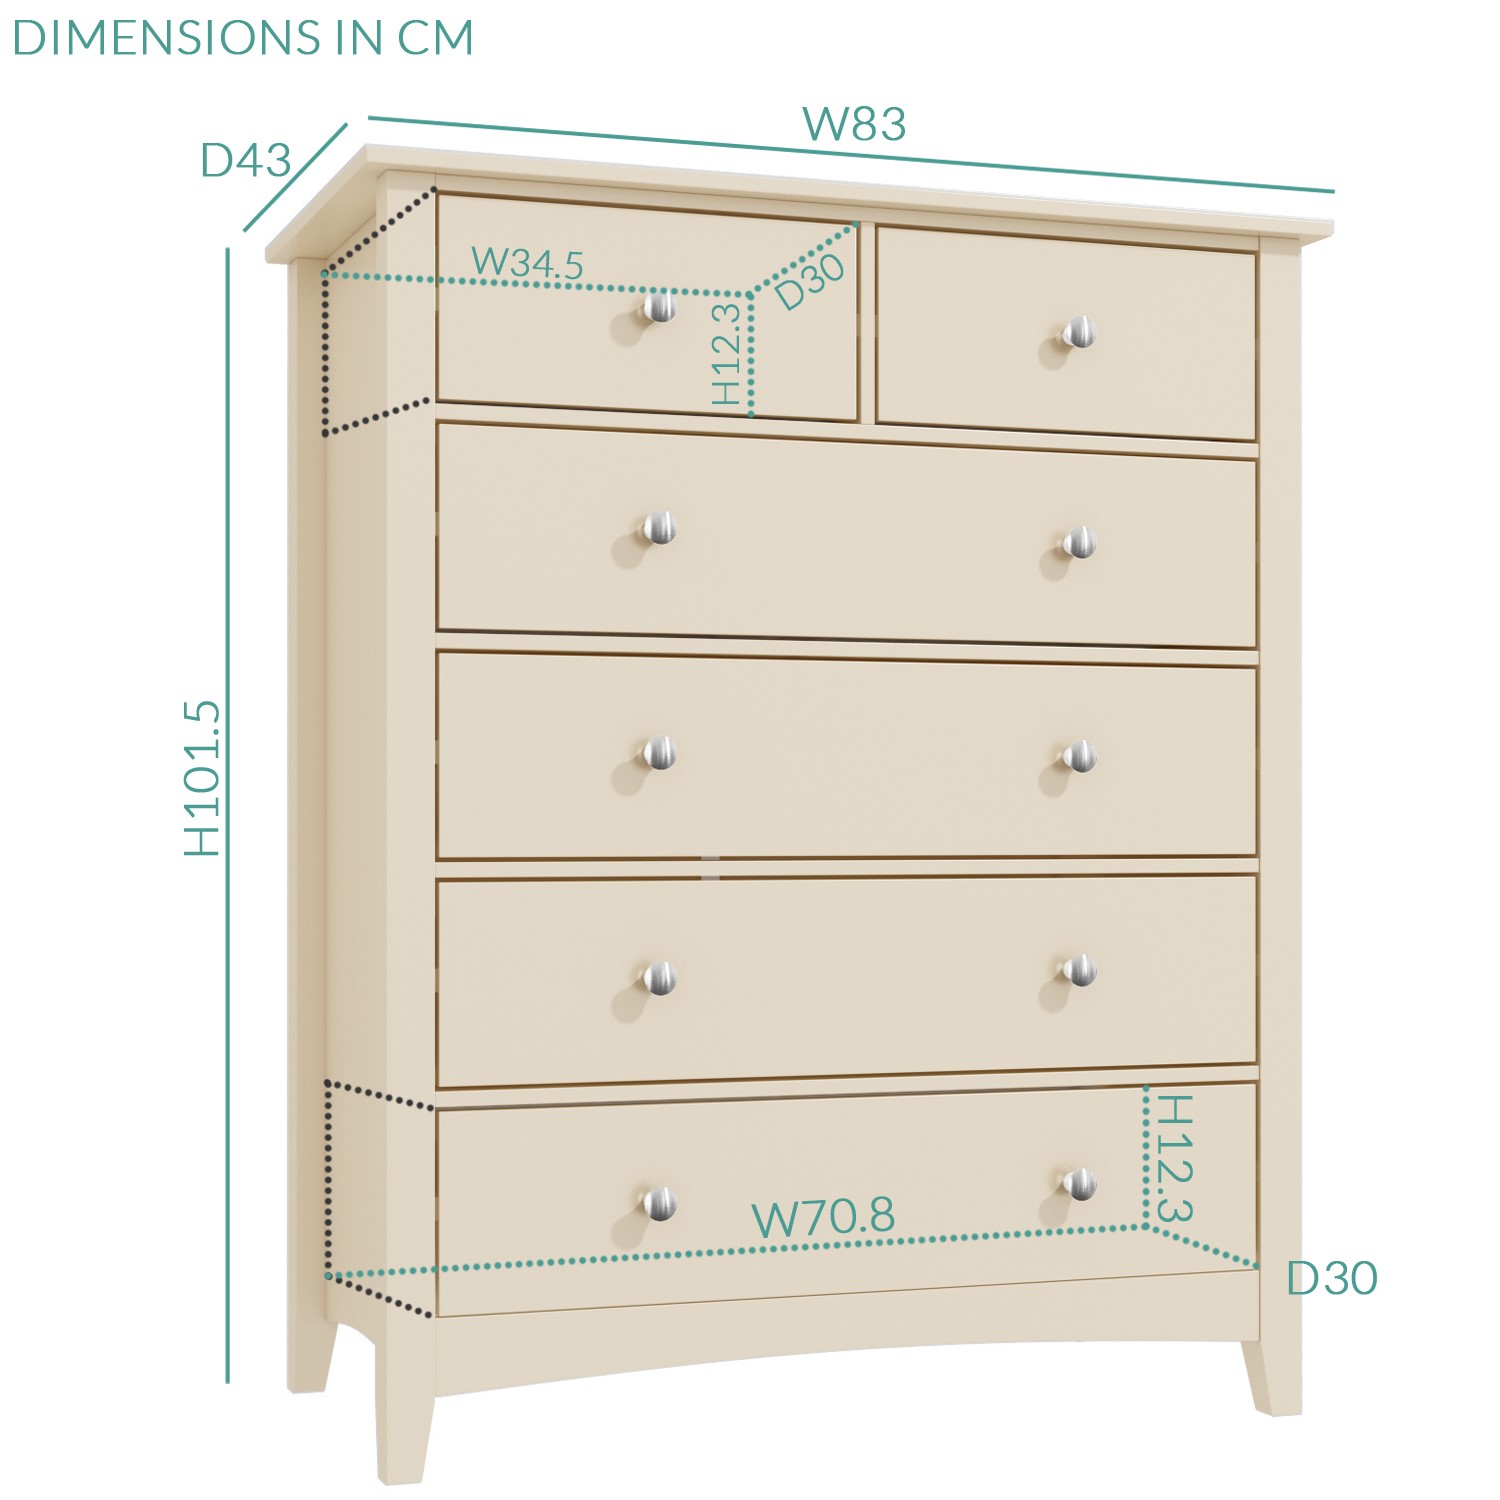 Cream 2+4 Chest of Drawers Solid Wood Tall Storage Bedroom Furniture Ivory White